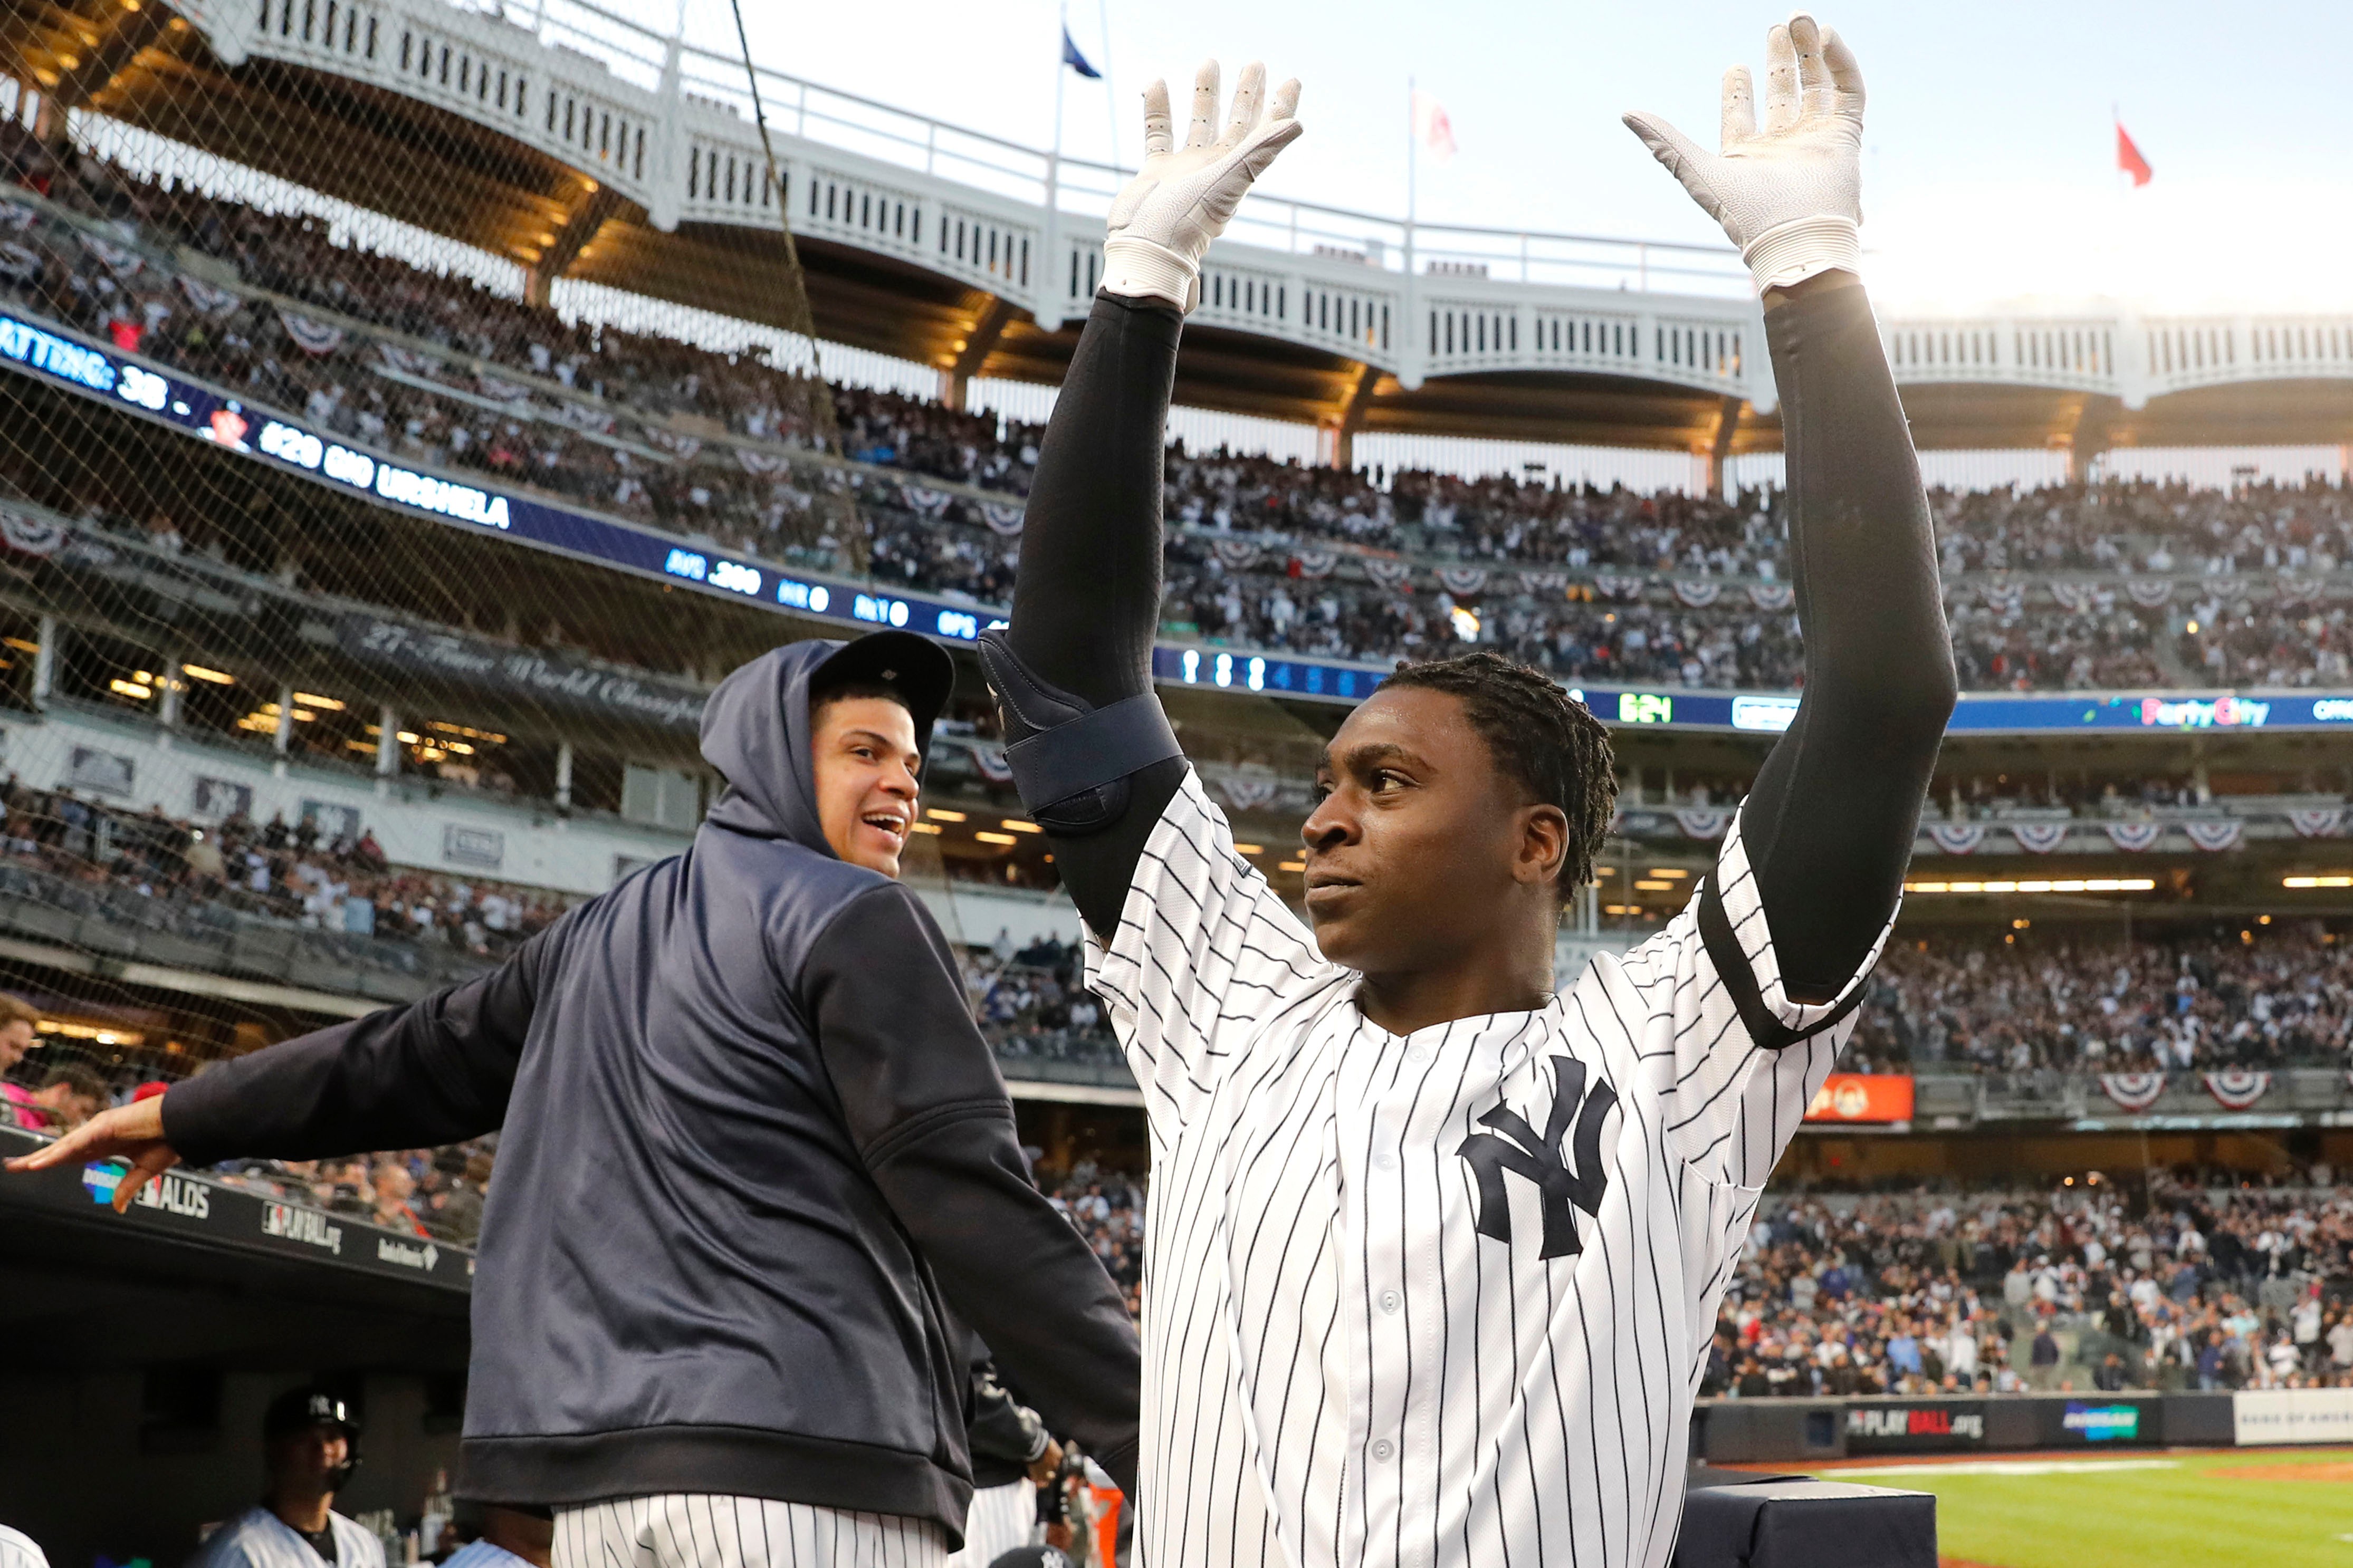 On social media, Didi said goodbye to the Yankees and their fans: